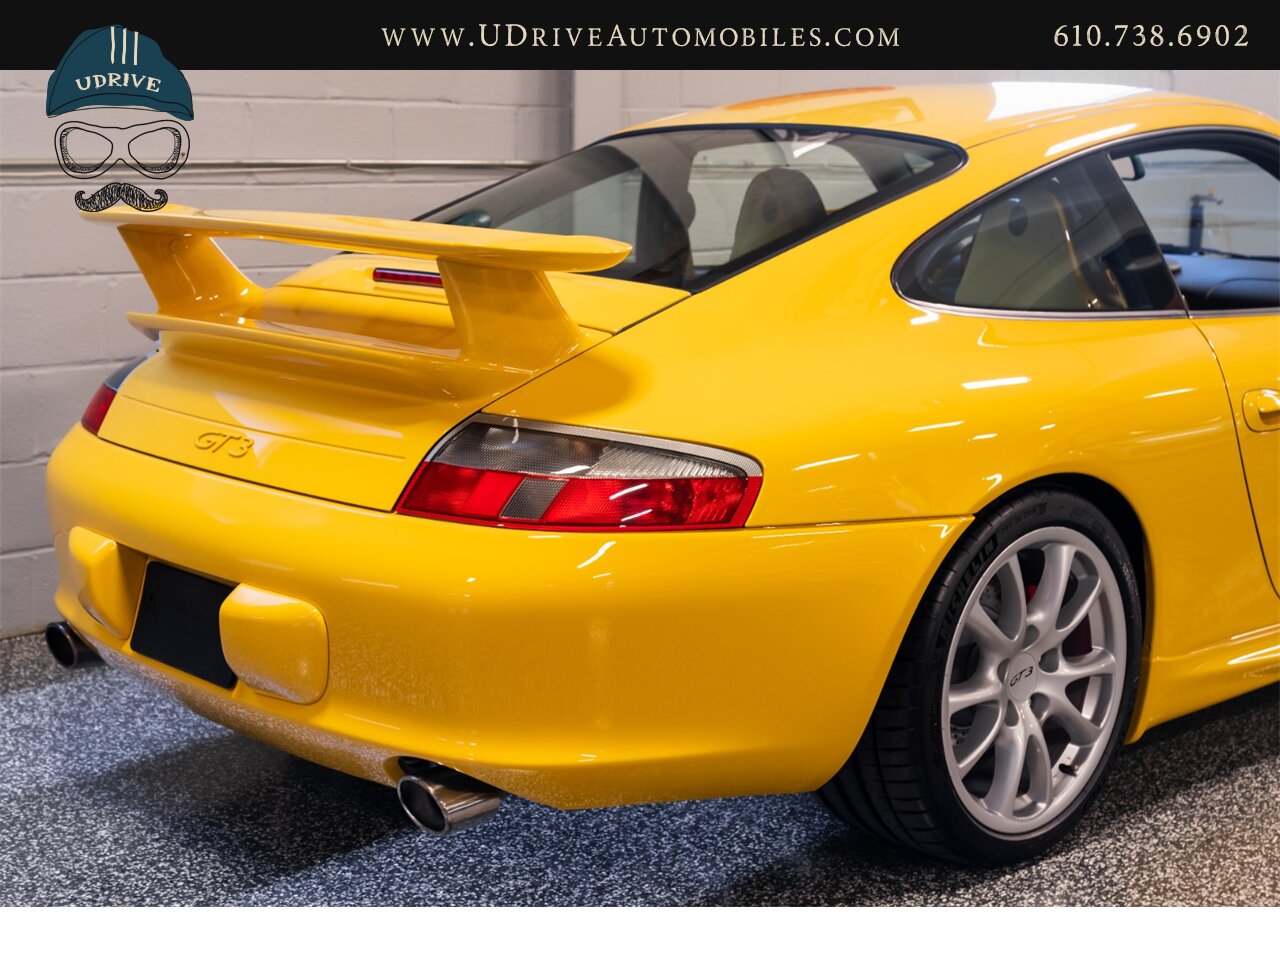 2005 Porsche 911 GT3 996 Speed Yellow Sport Seats Pntd Hardbacks  Pntd Console Deviating Stitch Yellow Accents Throughout - Photo 20 - West Chester, PA 19382